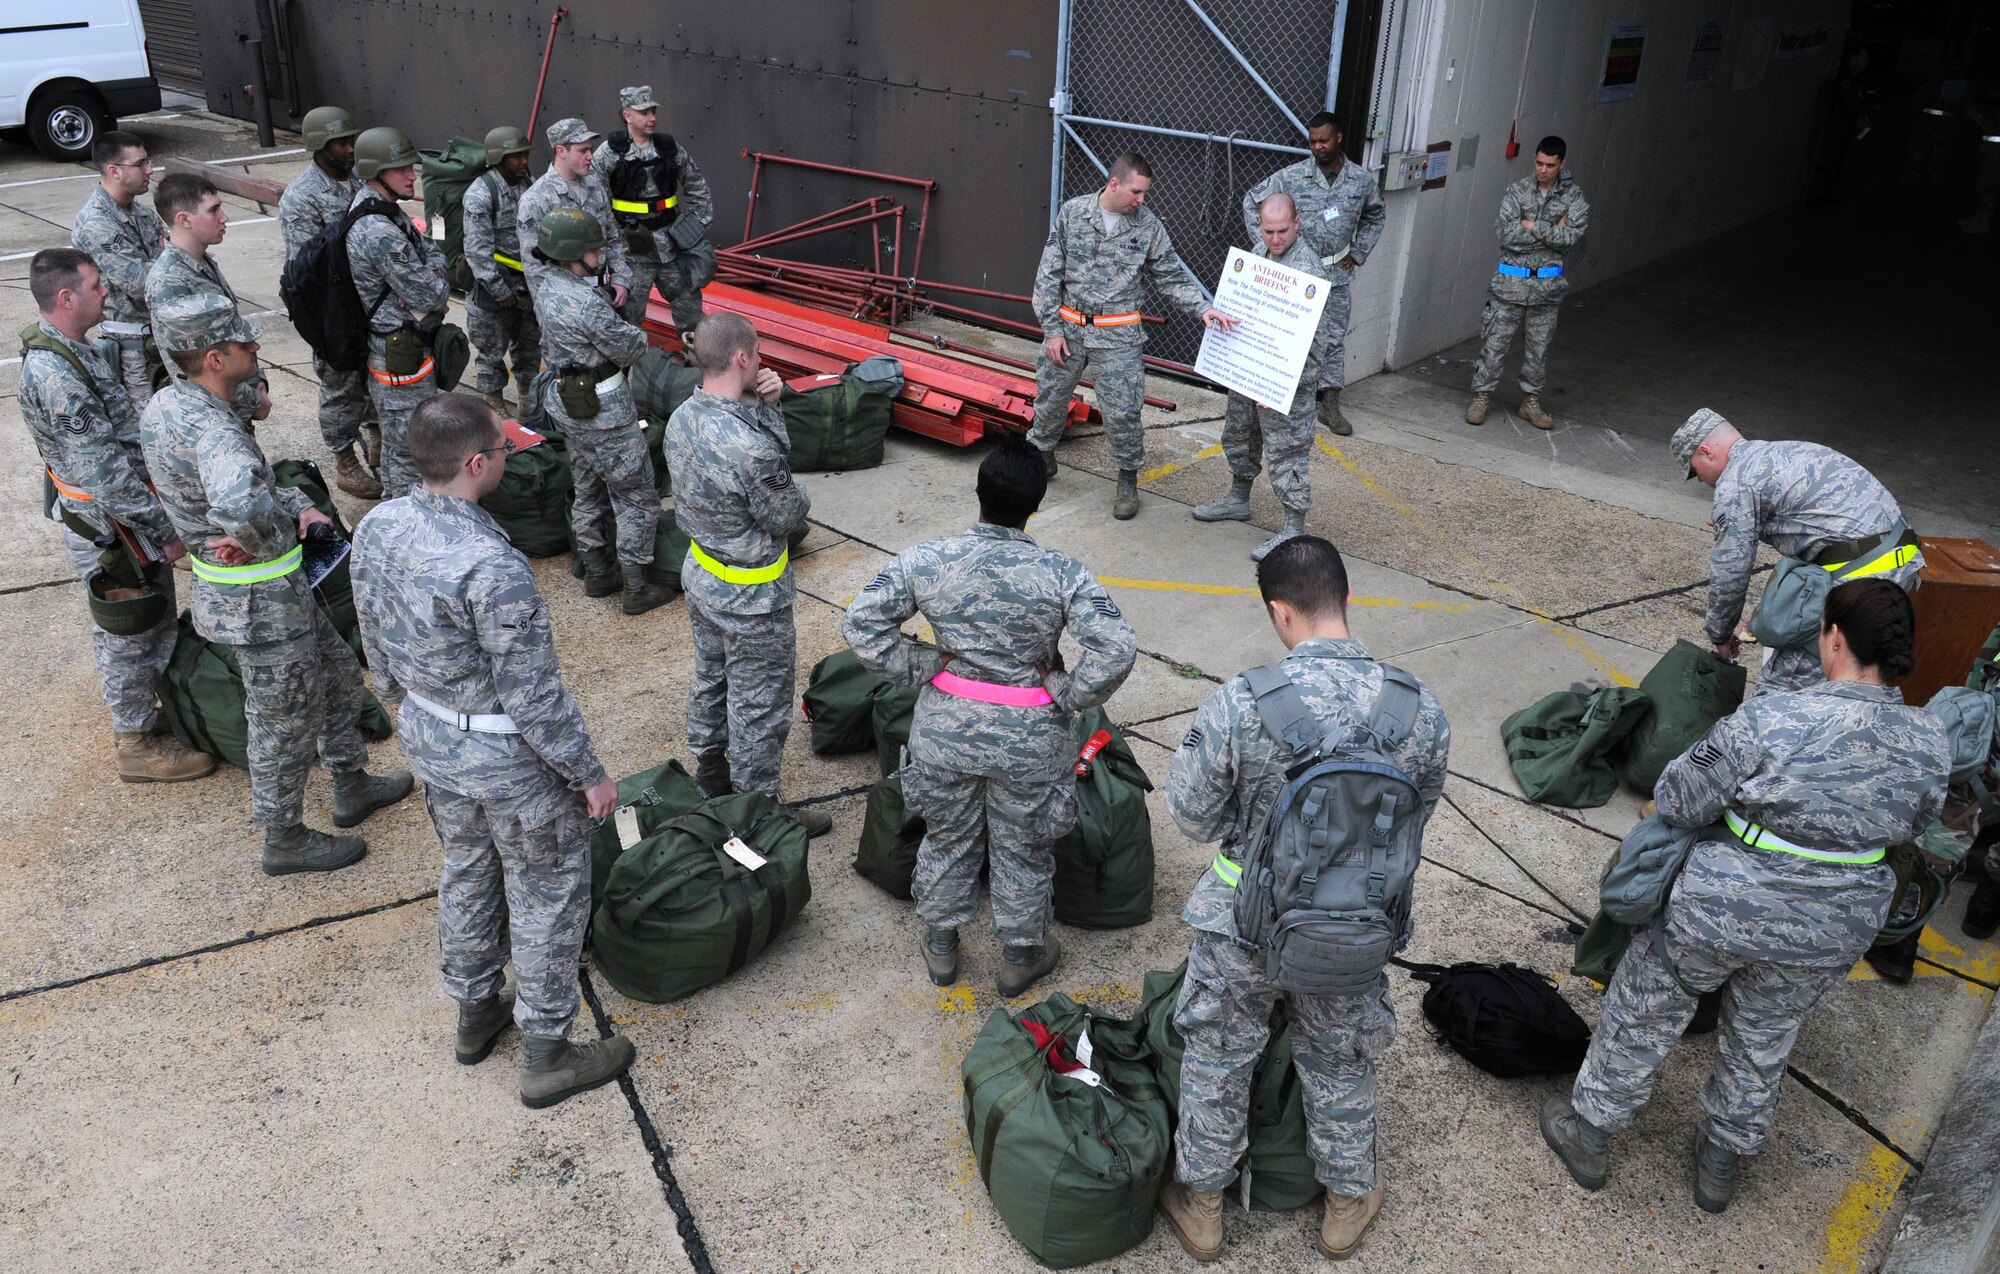 RAF MILDENHALL, England – Staff Sgt. Edward Bourgeois, 100th Logistics Readiness Squadron, briefs Airmen participating in the Phase I portion of the Operational Readiness Inspection outside Building 550 to ensure each individual bag is properly tagged and accounted for Oct. 7. (U.S. Air Force photo/ Staff Sgt. Jerry Fleshman)